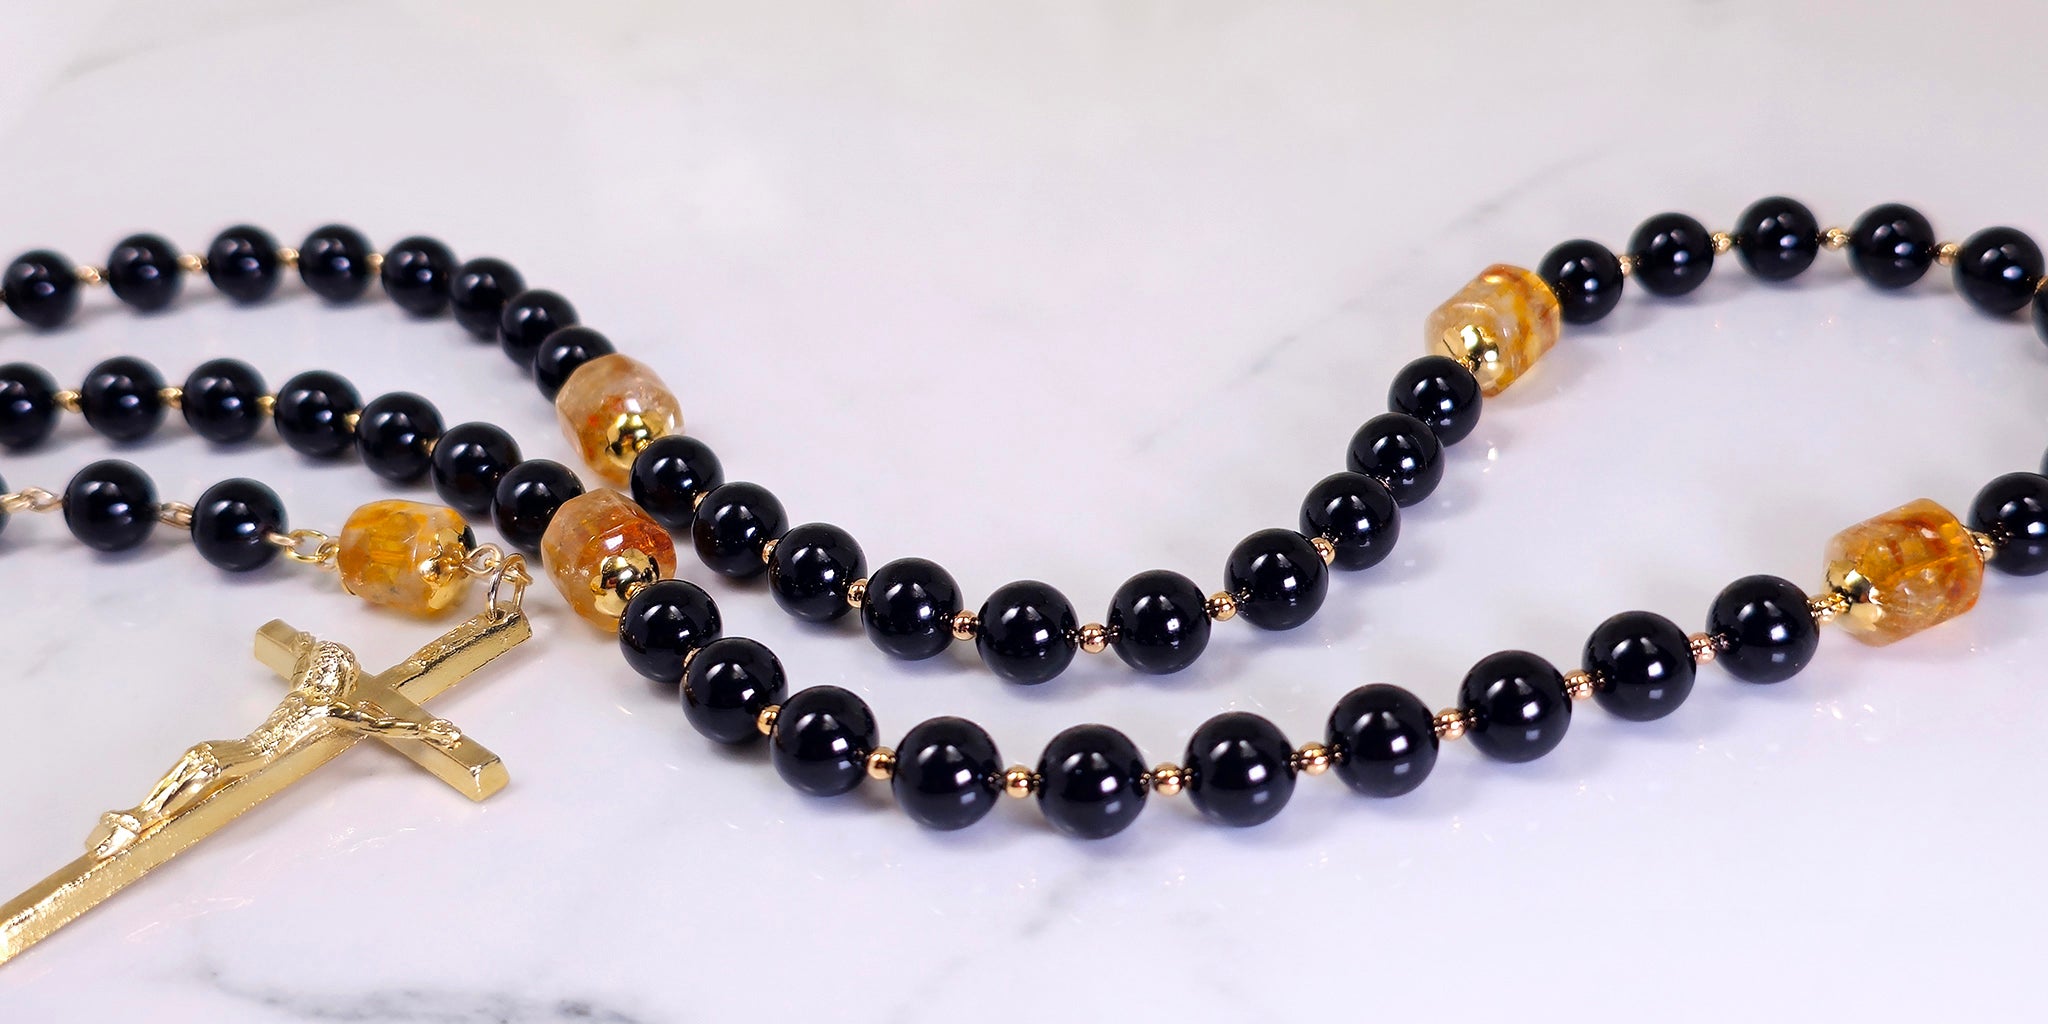 Black Onyx rosary with gold citrine gemstone focal beads and gold finding placed on top of a shiny table.